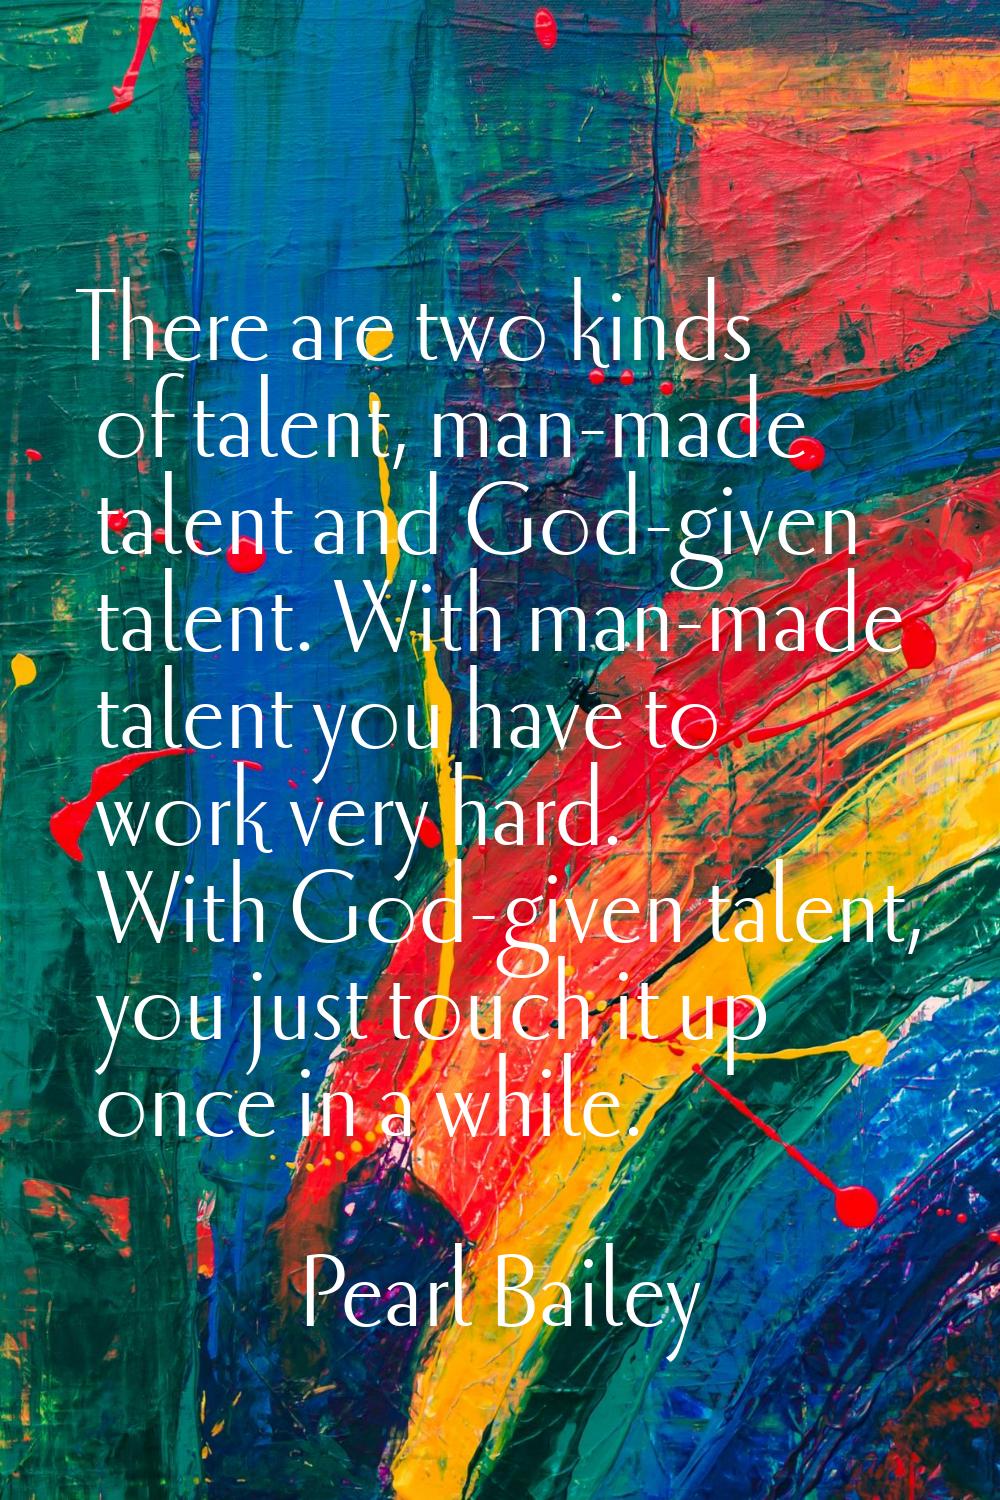 There are two kinds of talent, man-made talent and God-given talent. With man-made talent you have 